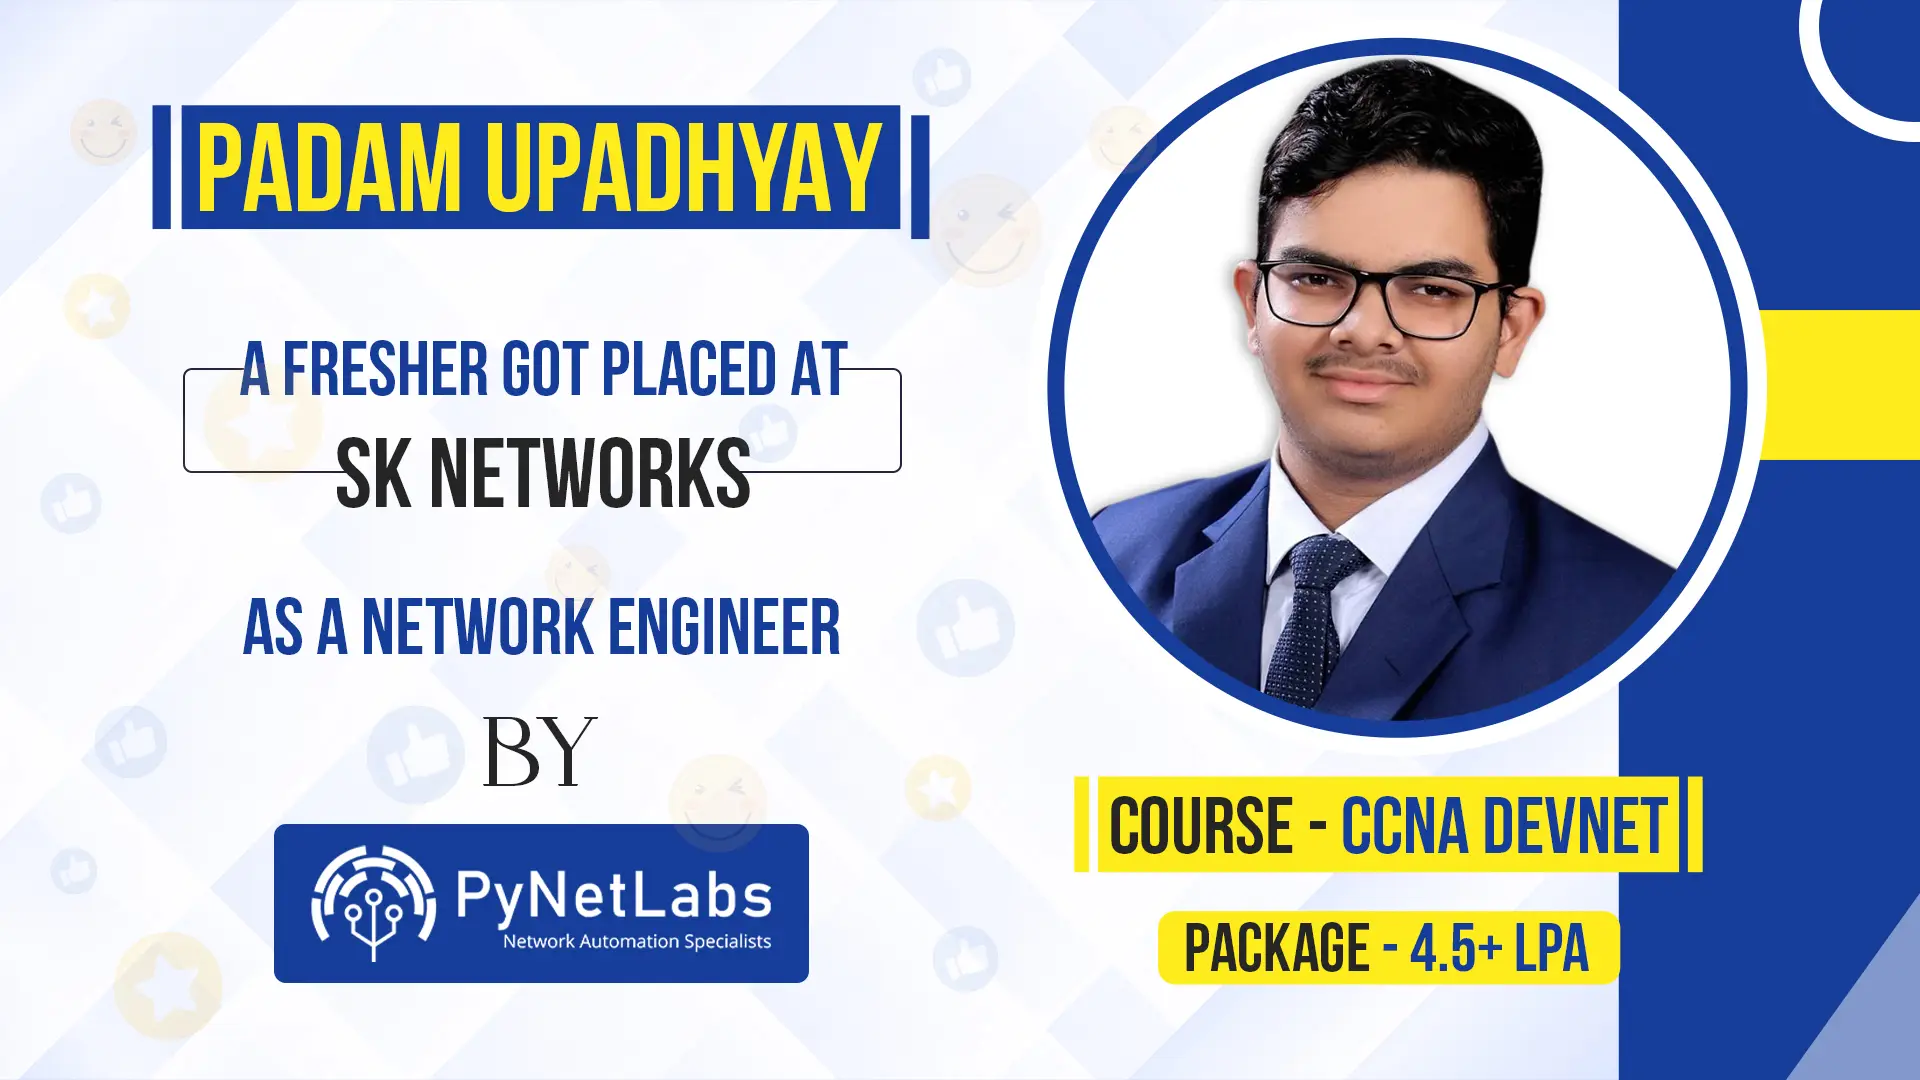 Padam Upadhyay, a fresher, got placed at SK Networks as a network engineer by PyNet Labs